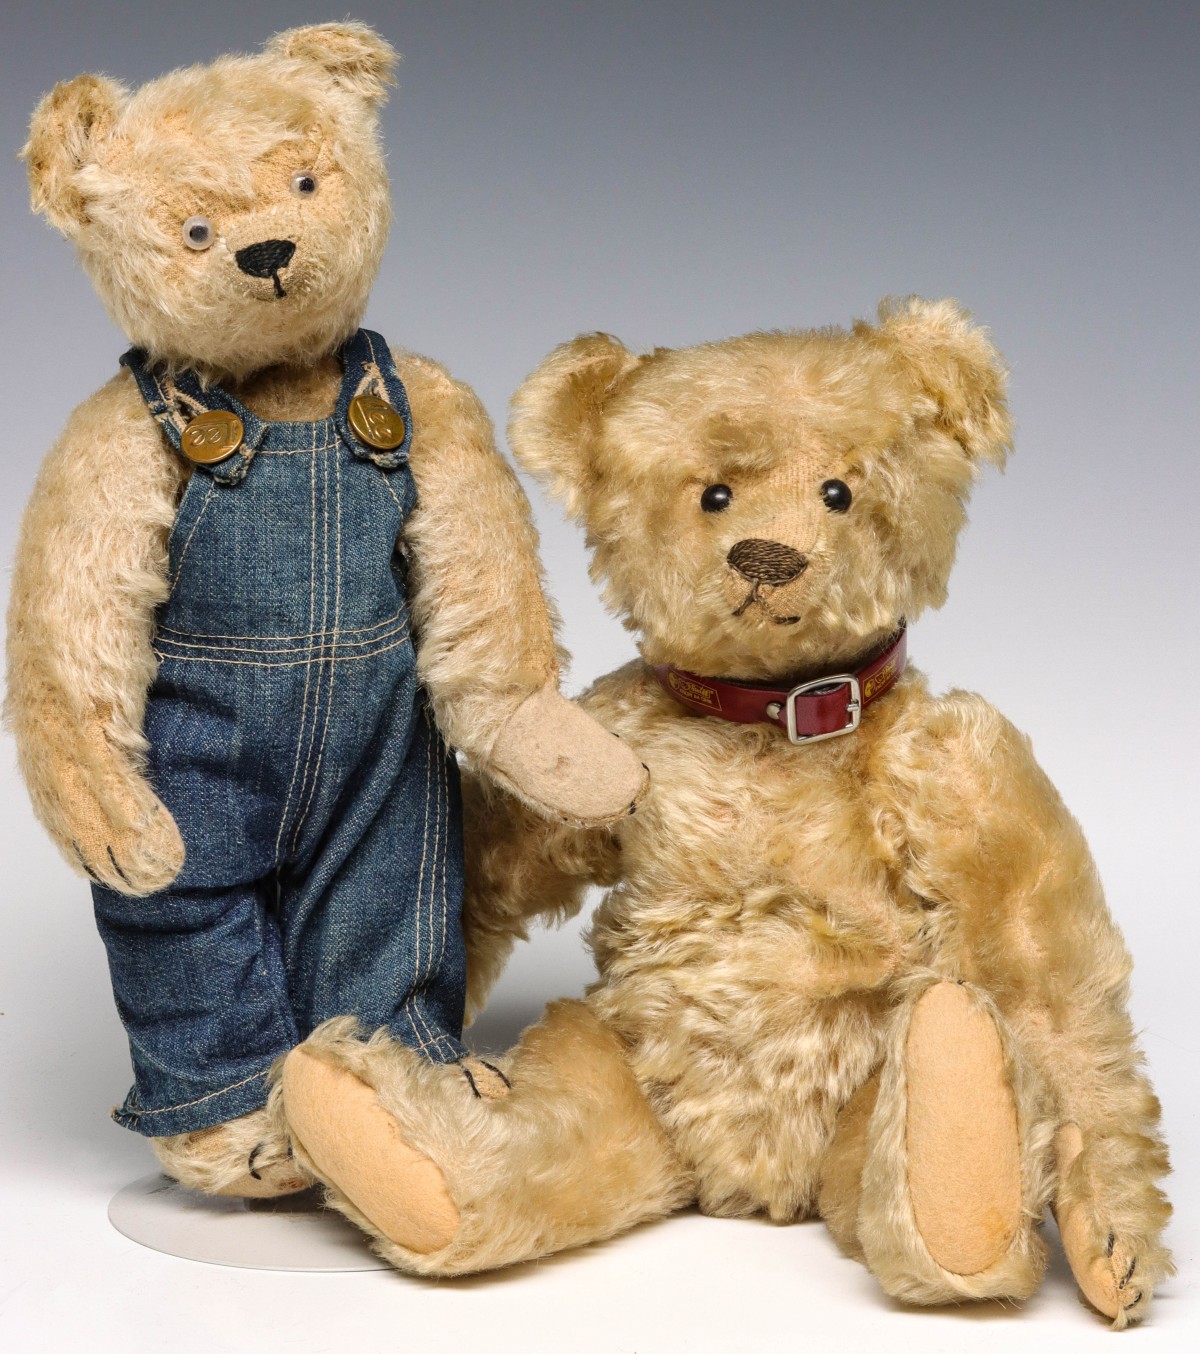 STEIFF QUALITY ANTIQUE TEDDY BEAR PLUS ANOTHER